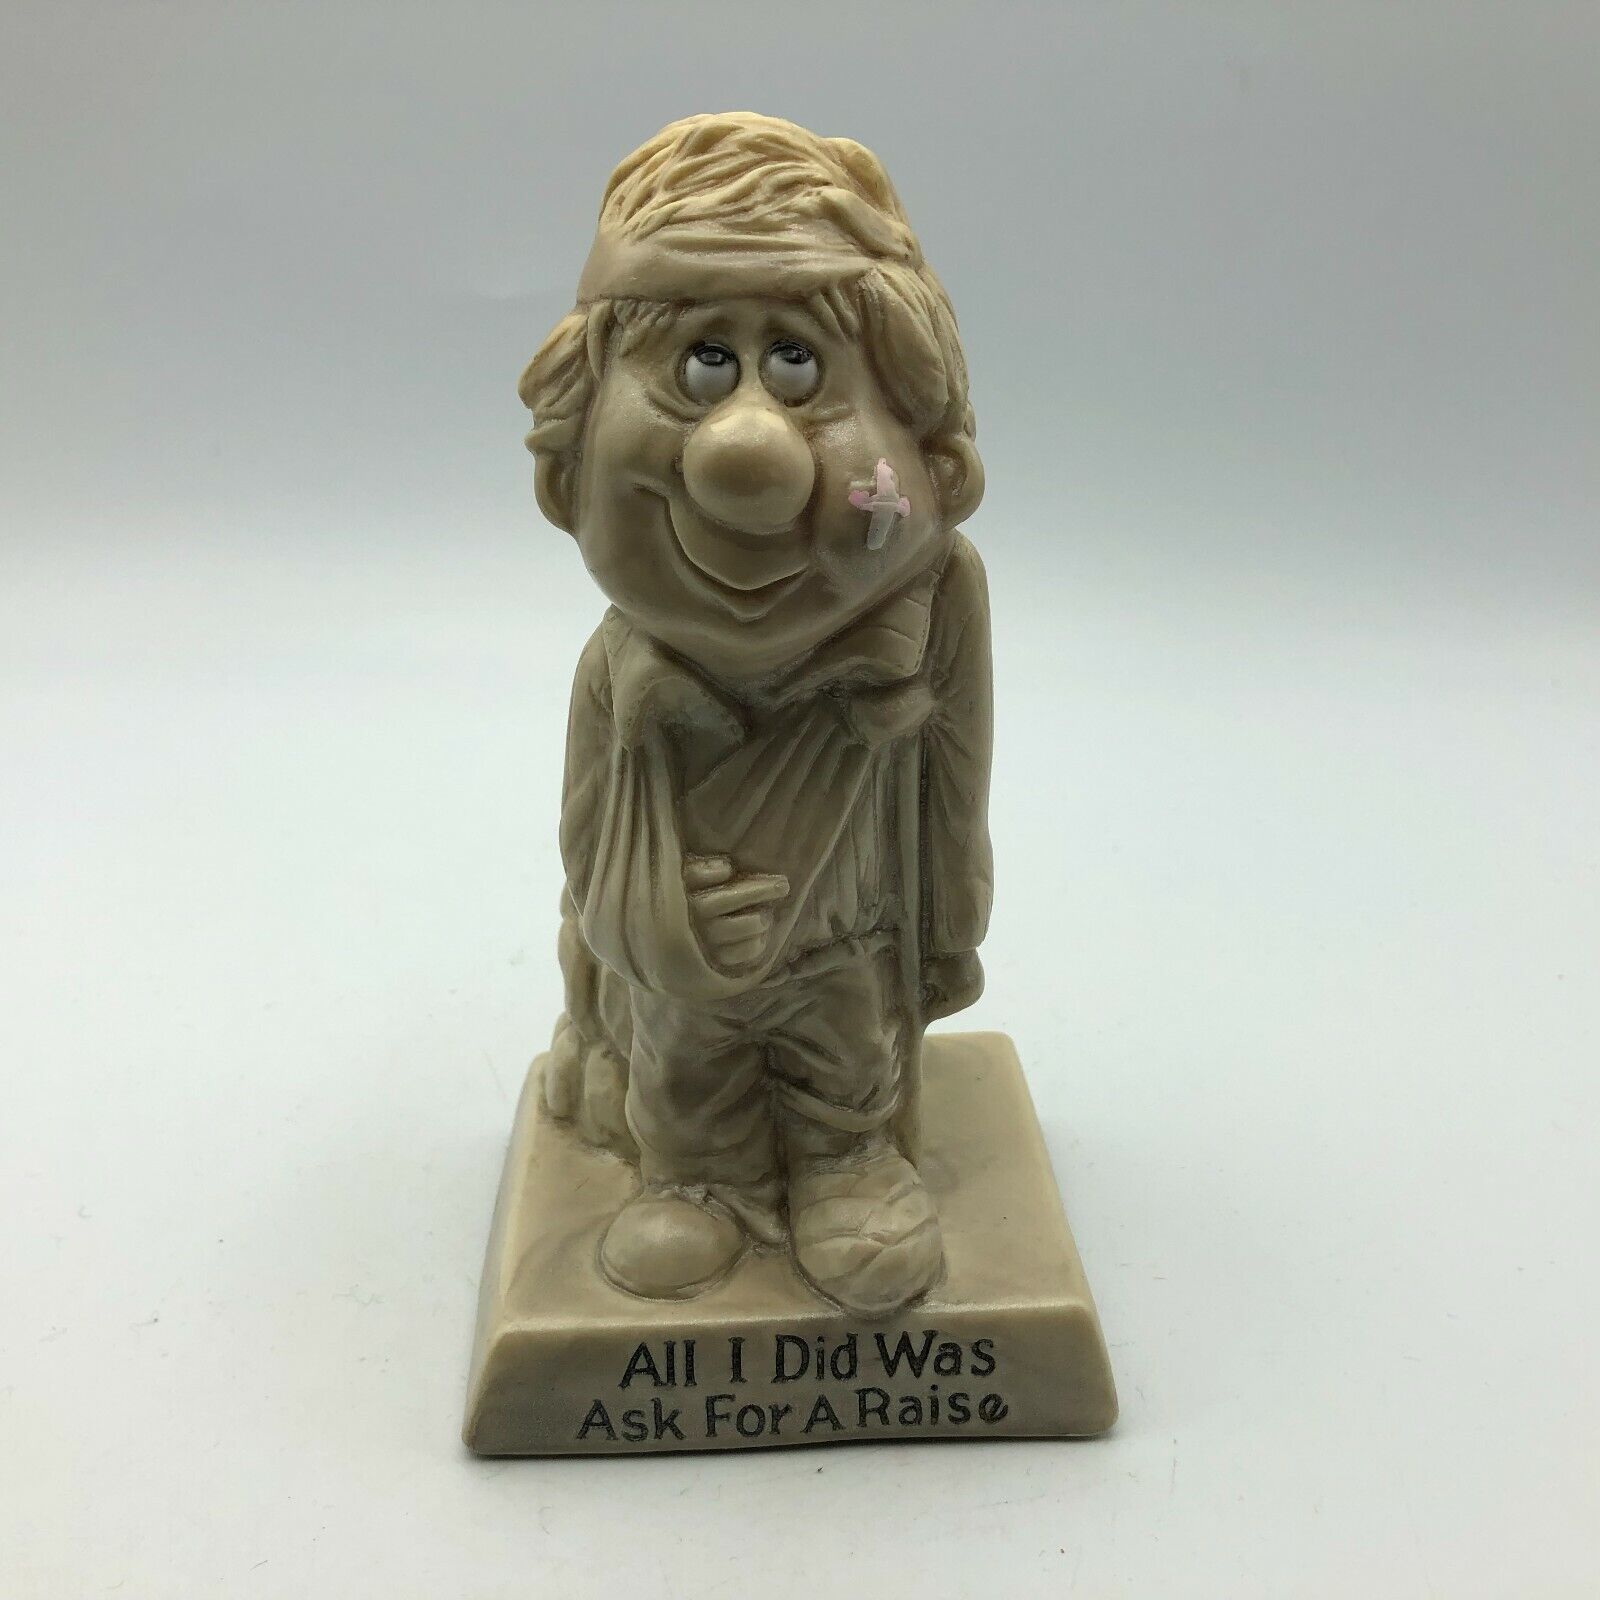 1970 Vtg ALL I DID WAS ASK FOR A RAISE Figurine Berrie Man Crutch Arm Sling S51